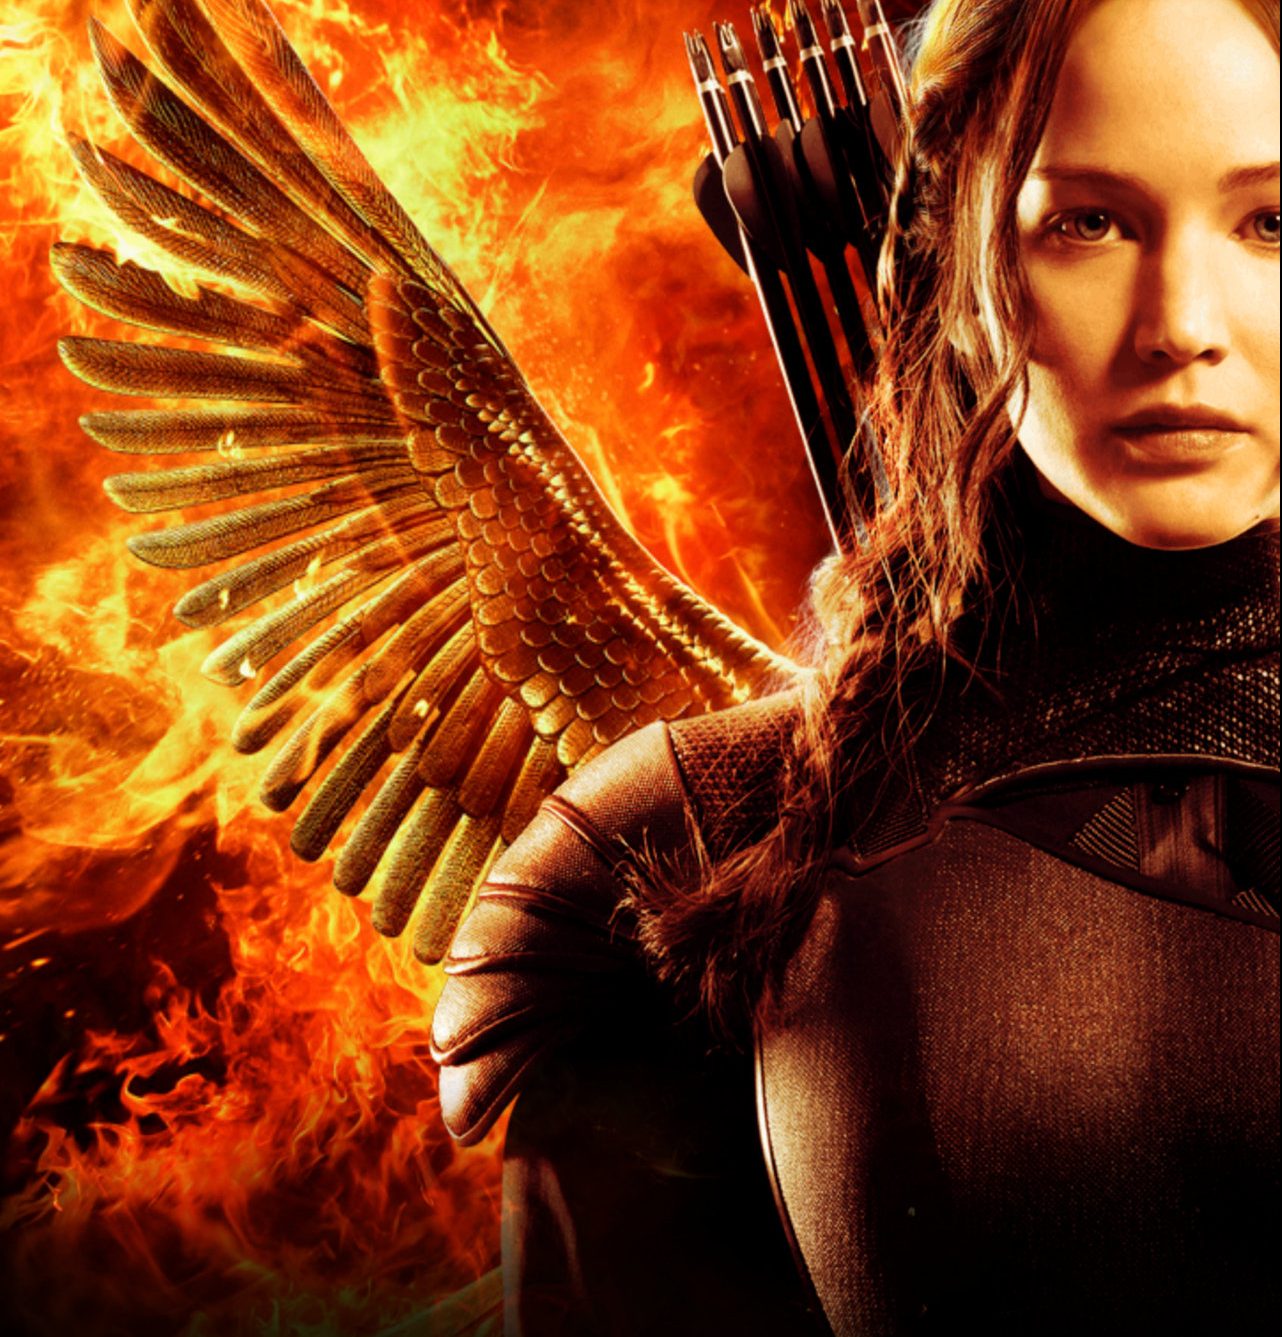 Hunger Games prequel to commence filming early 2022 Moviehole